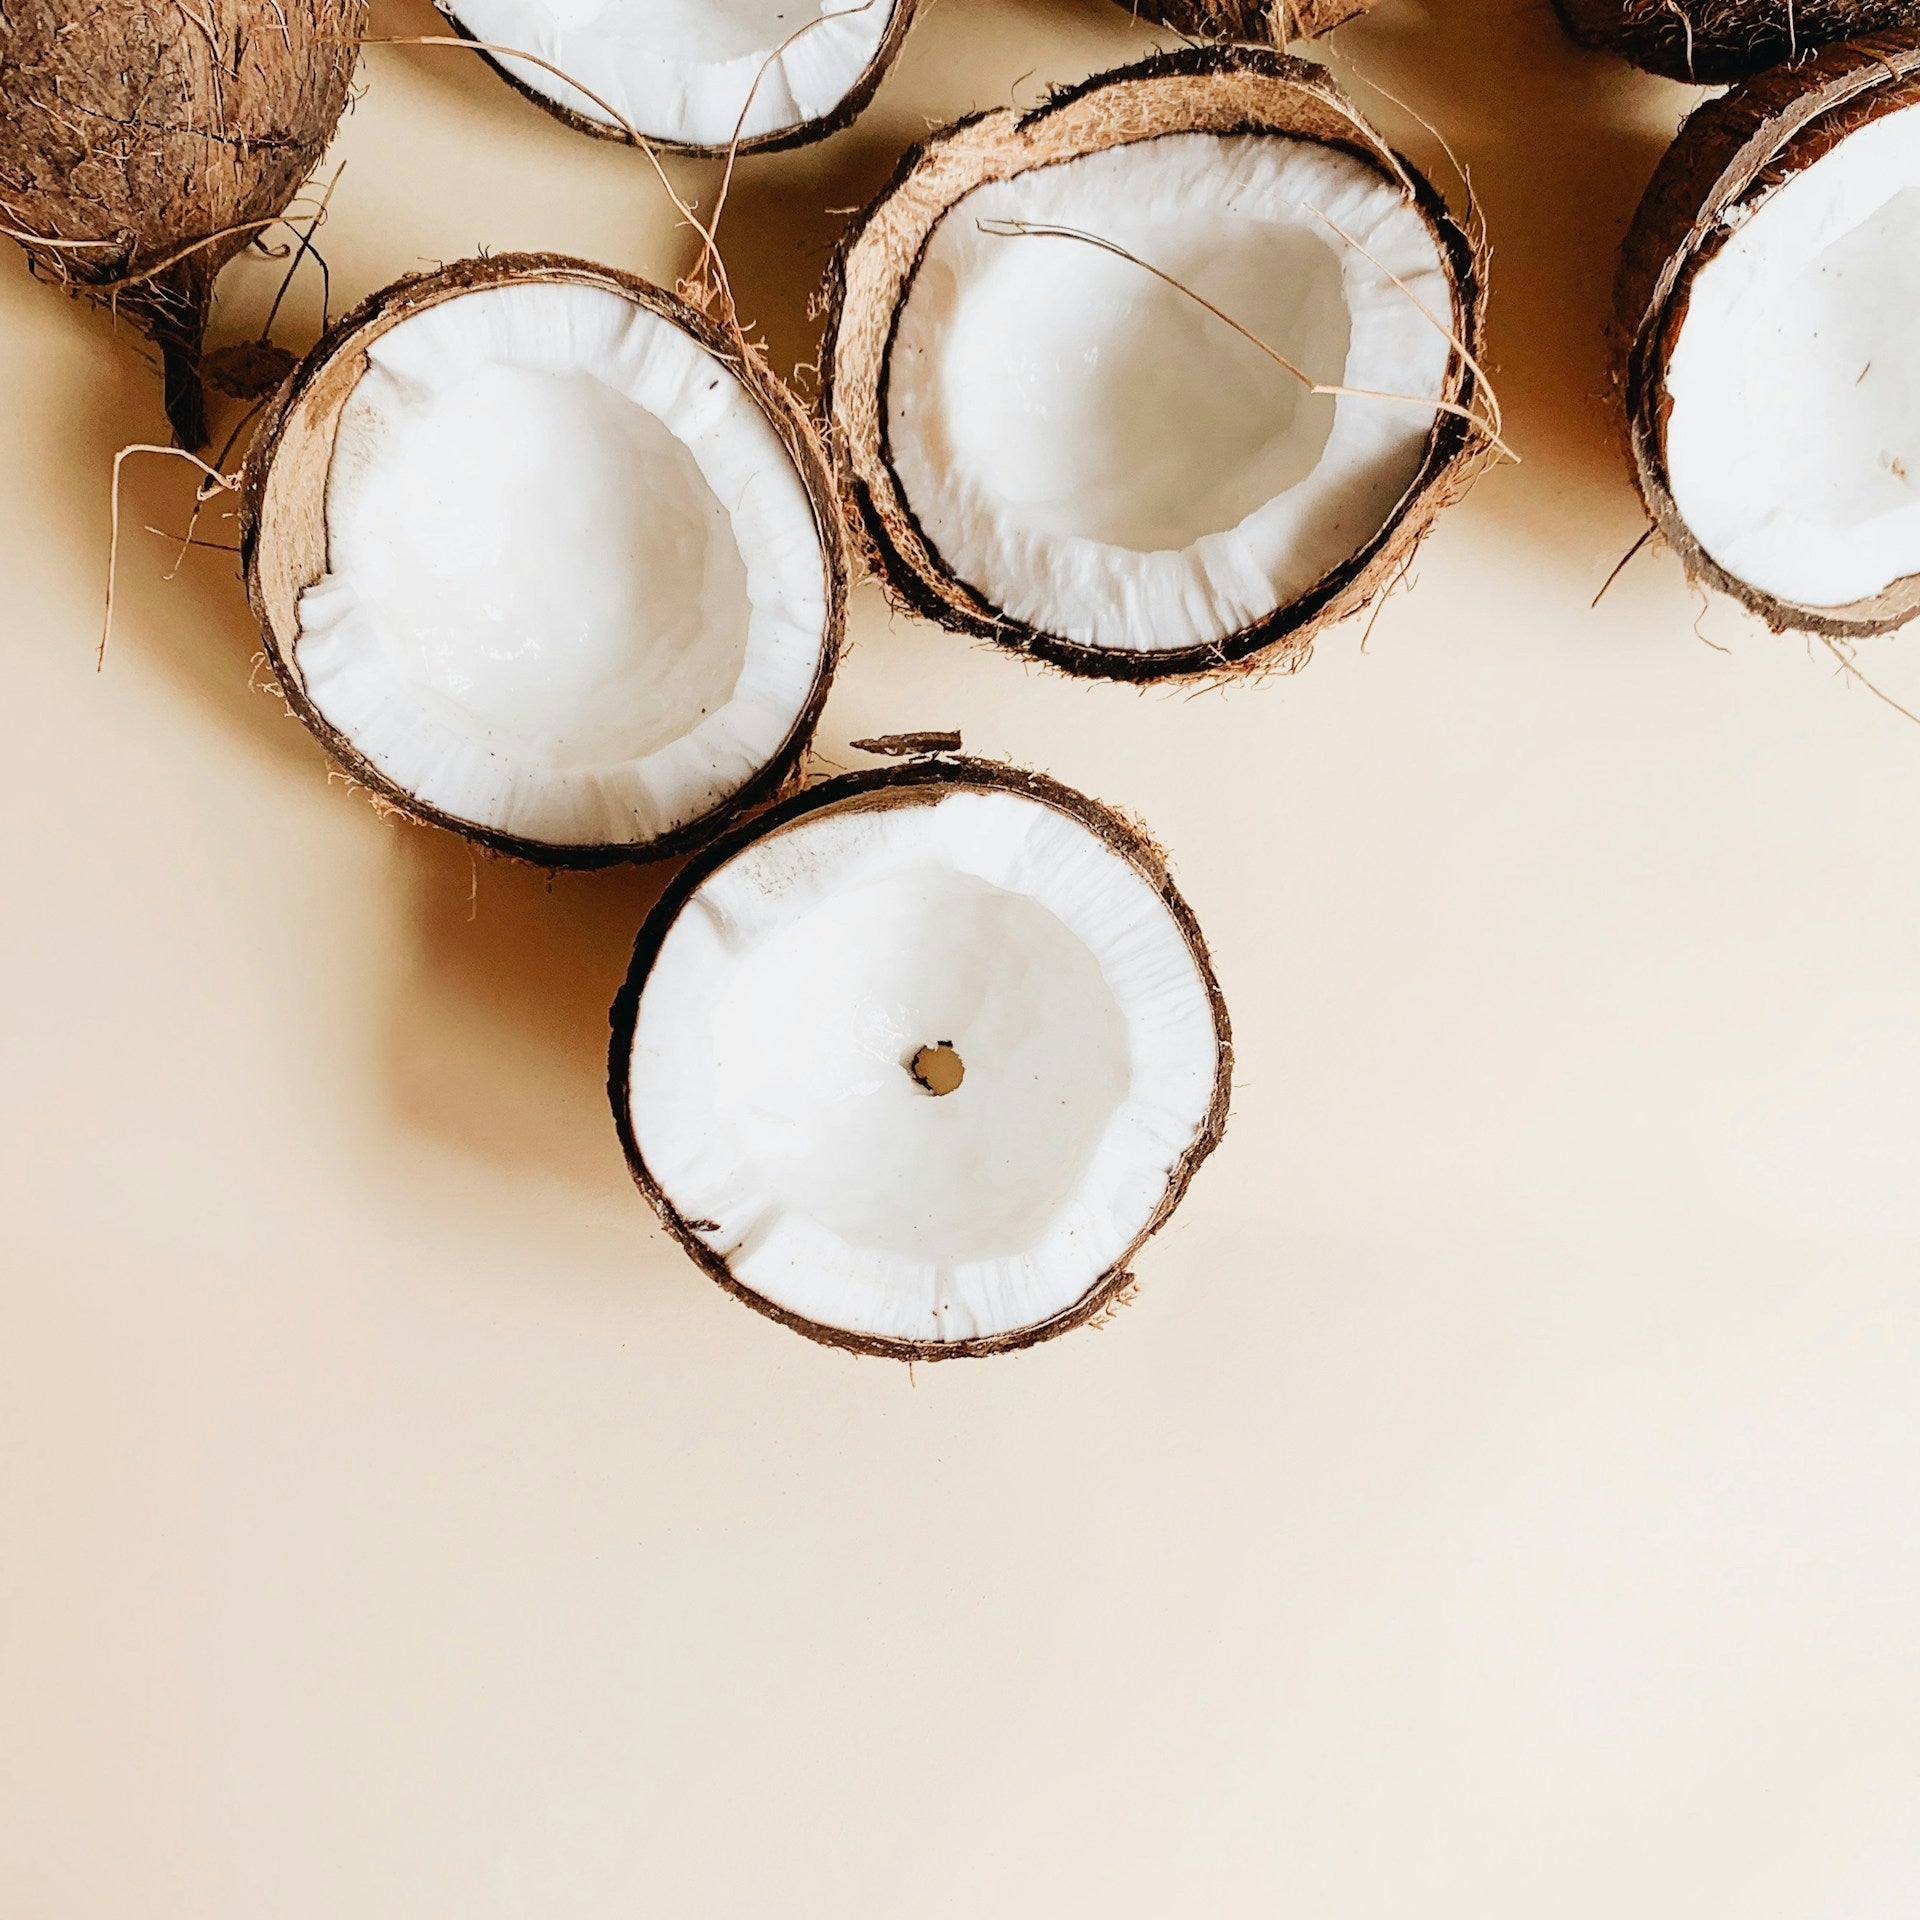 5 Reasons Why Coconut Oil Is So Good For Your Skin